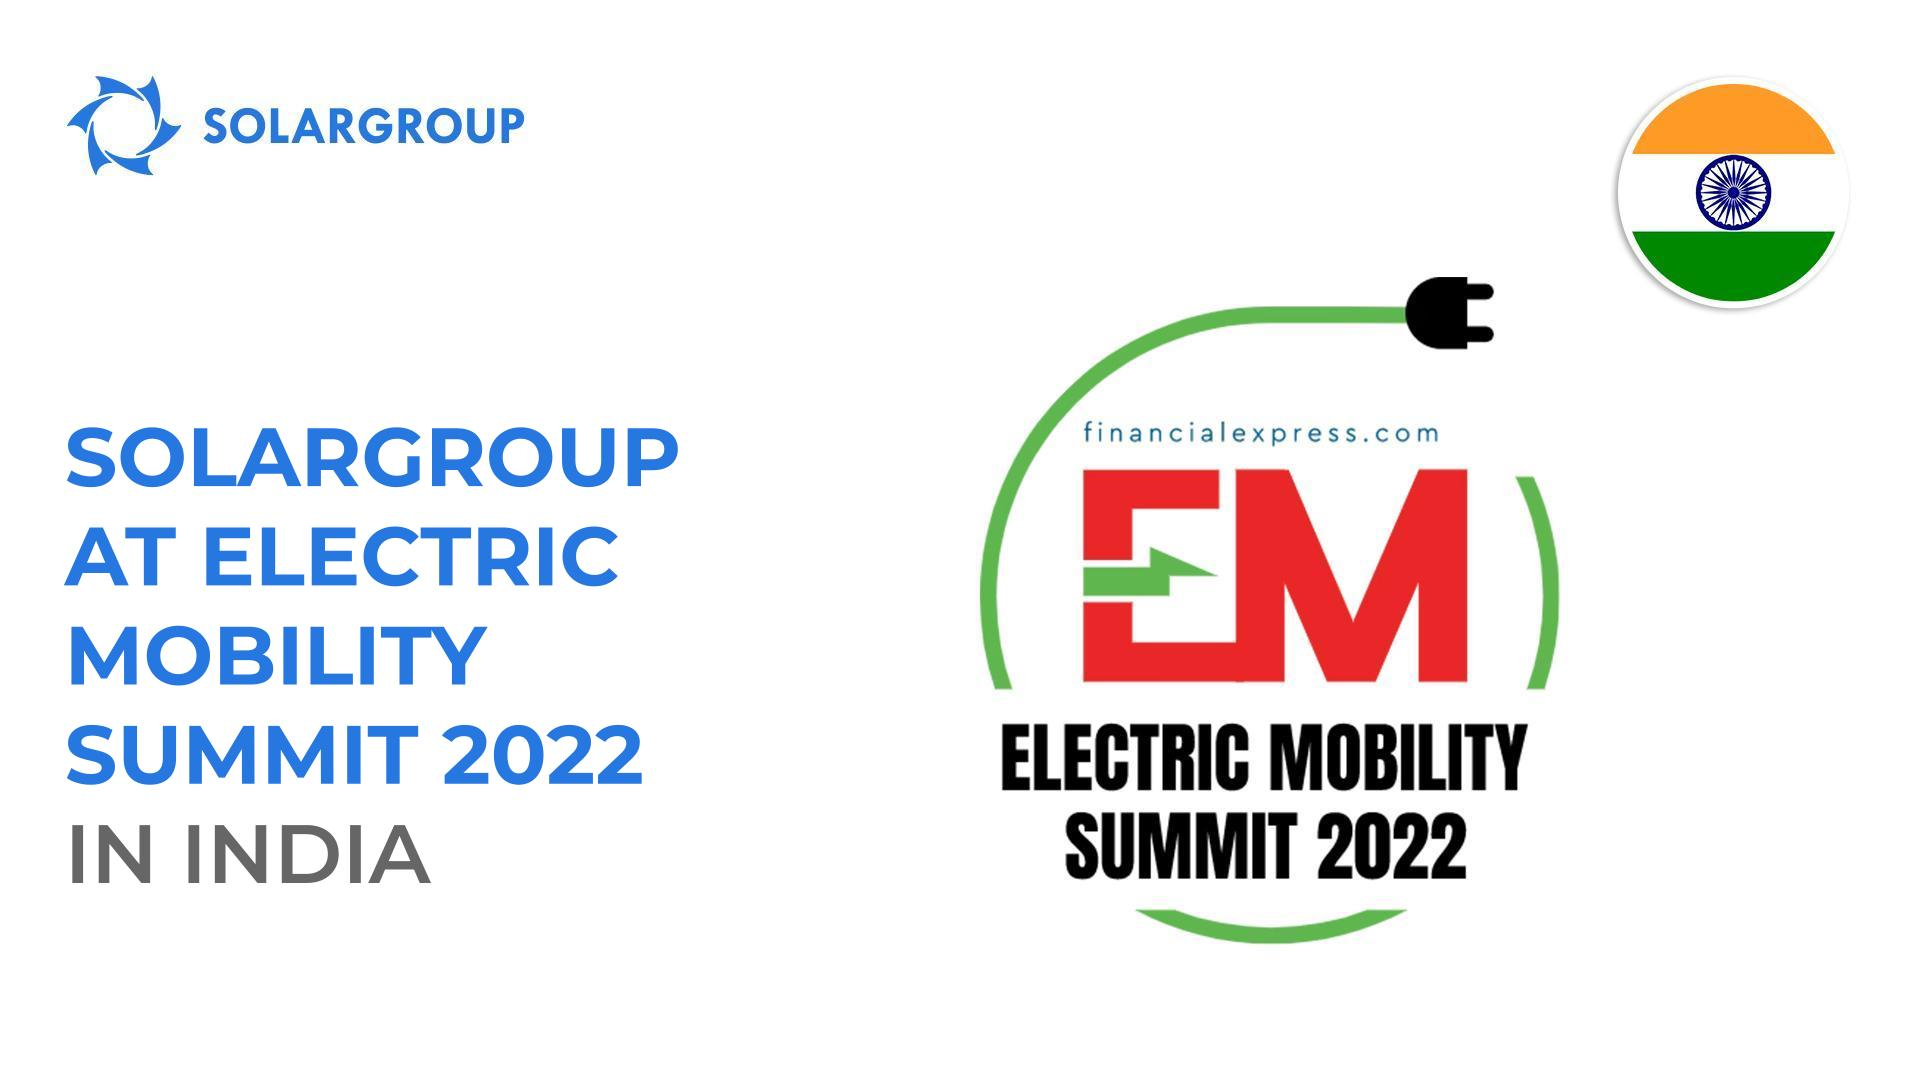 SOLARGROUP at Electric Mobility Summit 2022 in India